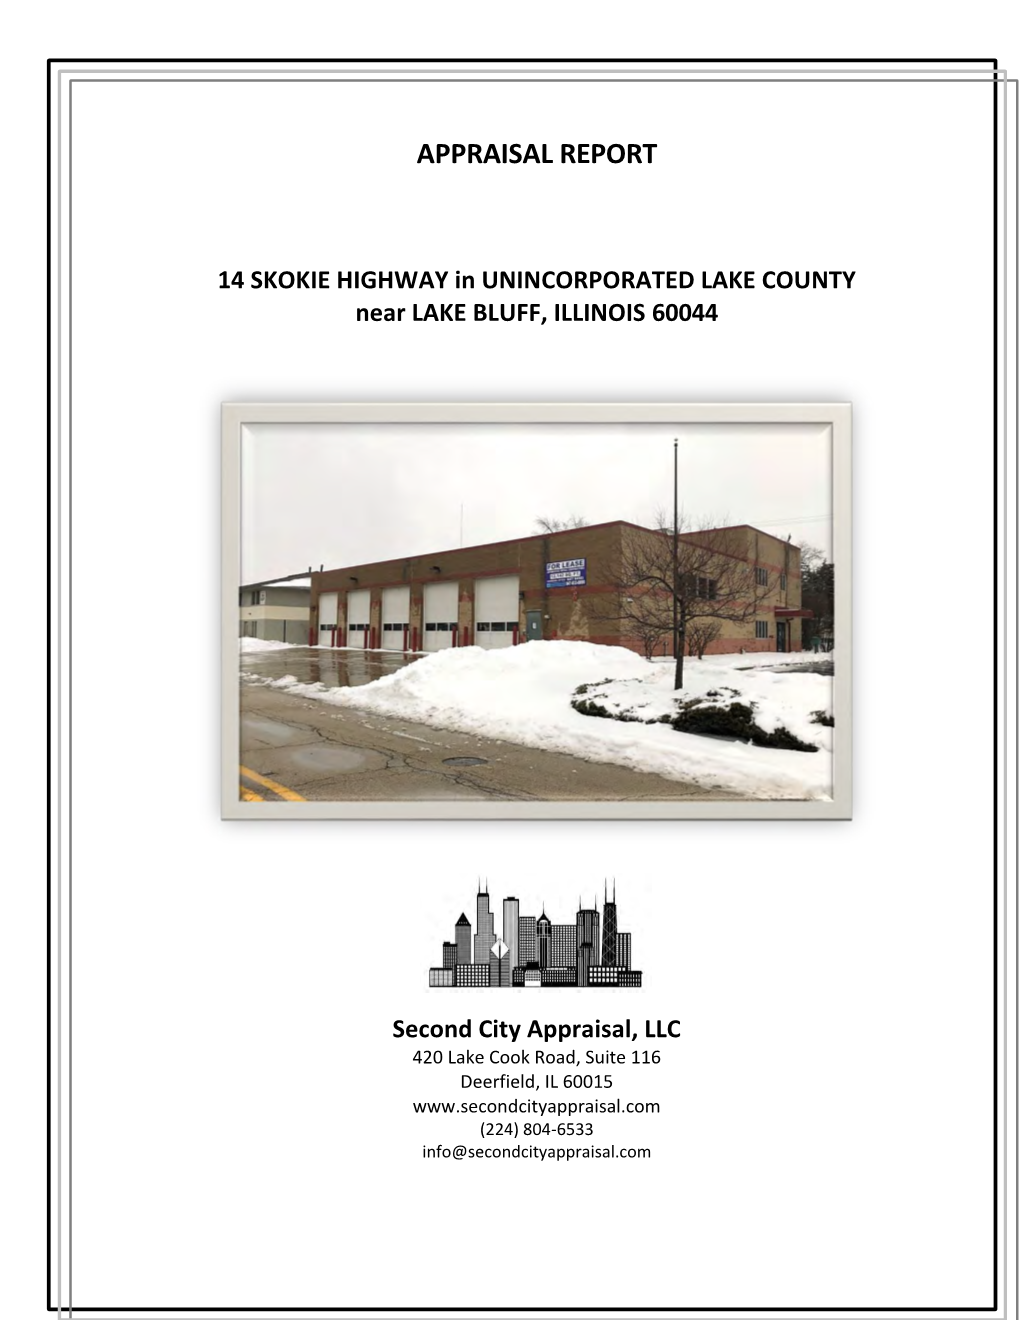 14 SKOKIE HIGHWAY in UNINCORPORATED LAKE COUNTY Near LAKE BLUFF, ILLINOIS 60044 Second City Appraisal